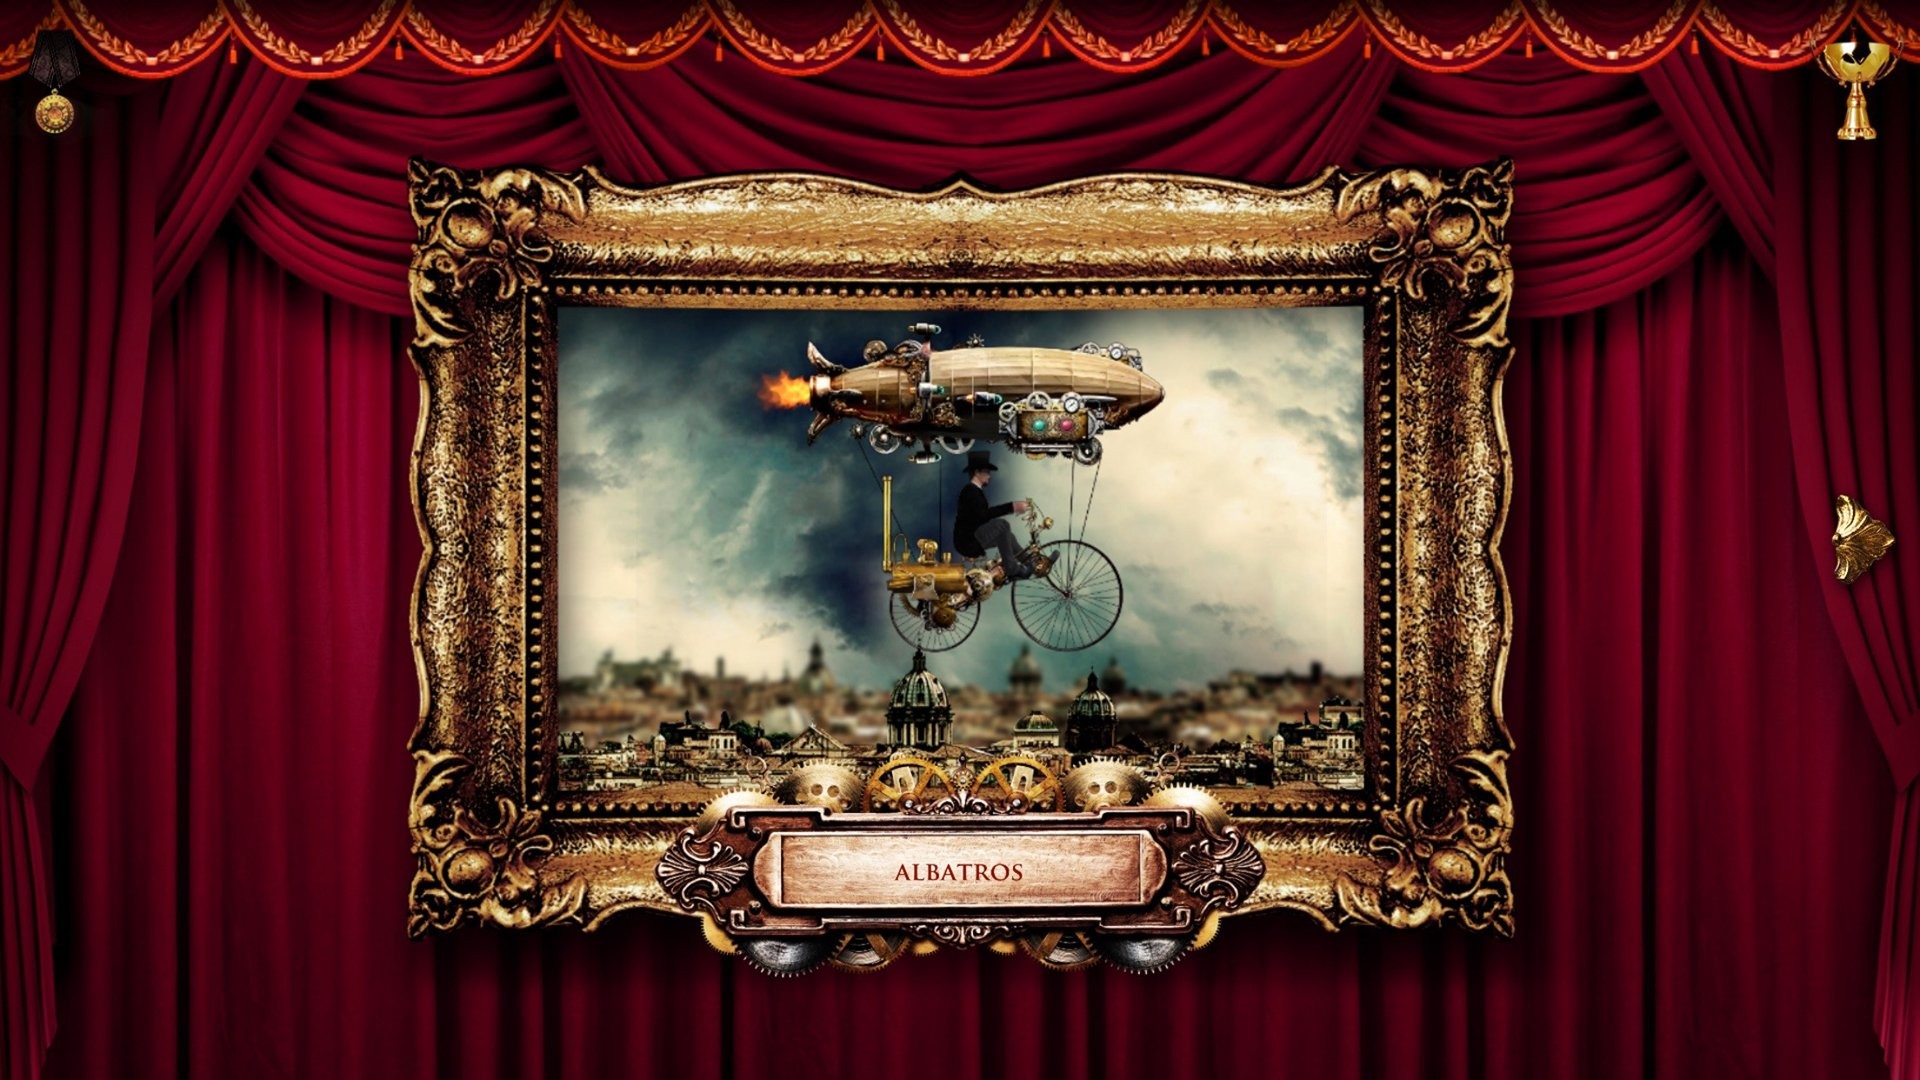 men, Steampunk, Gears, Metal, Zeppelin, Bicycle, Curtain, Picture frames, Cityscape, Florence, Flying Wallpaper